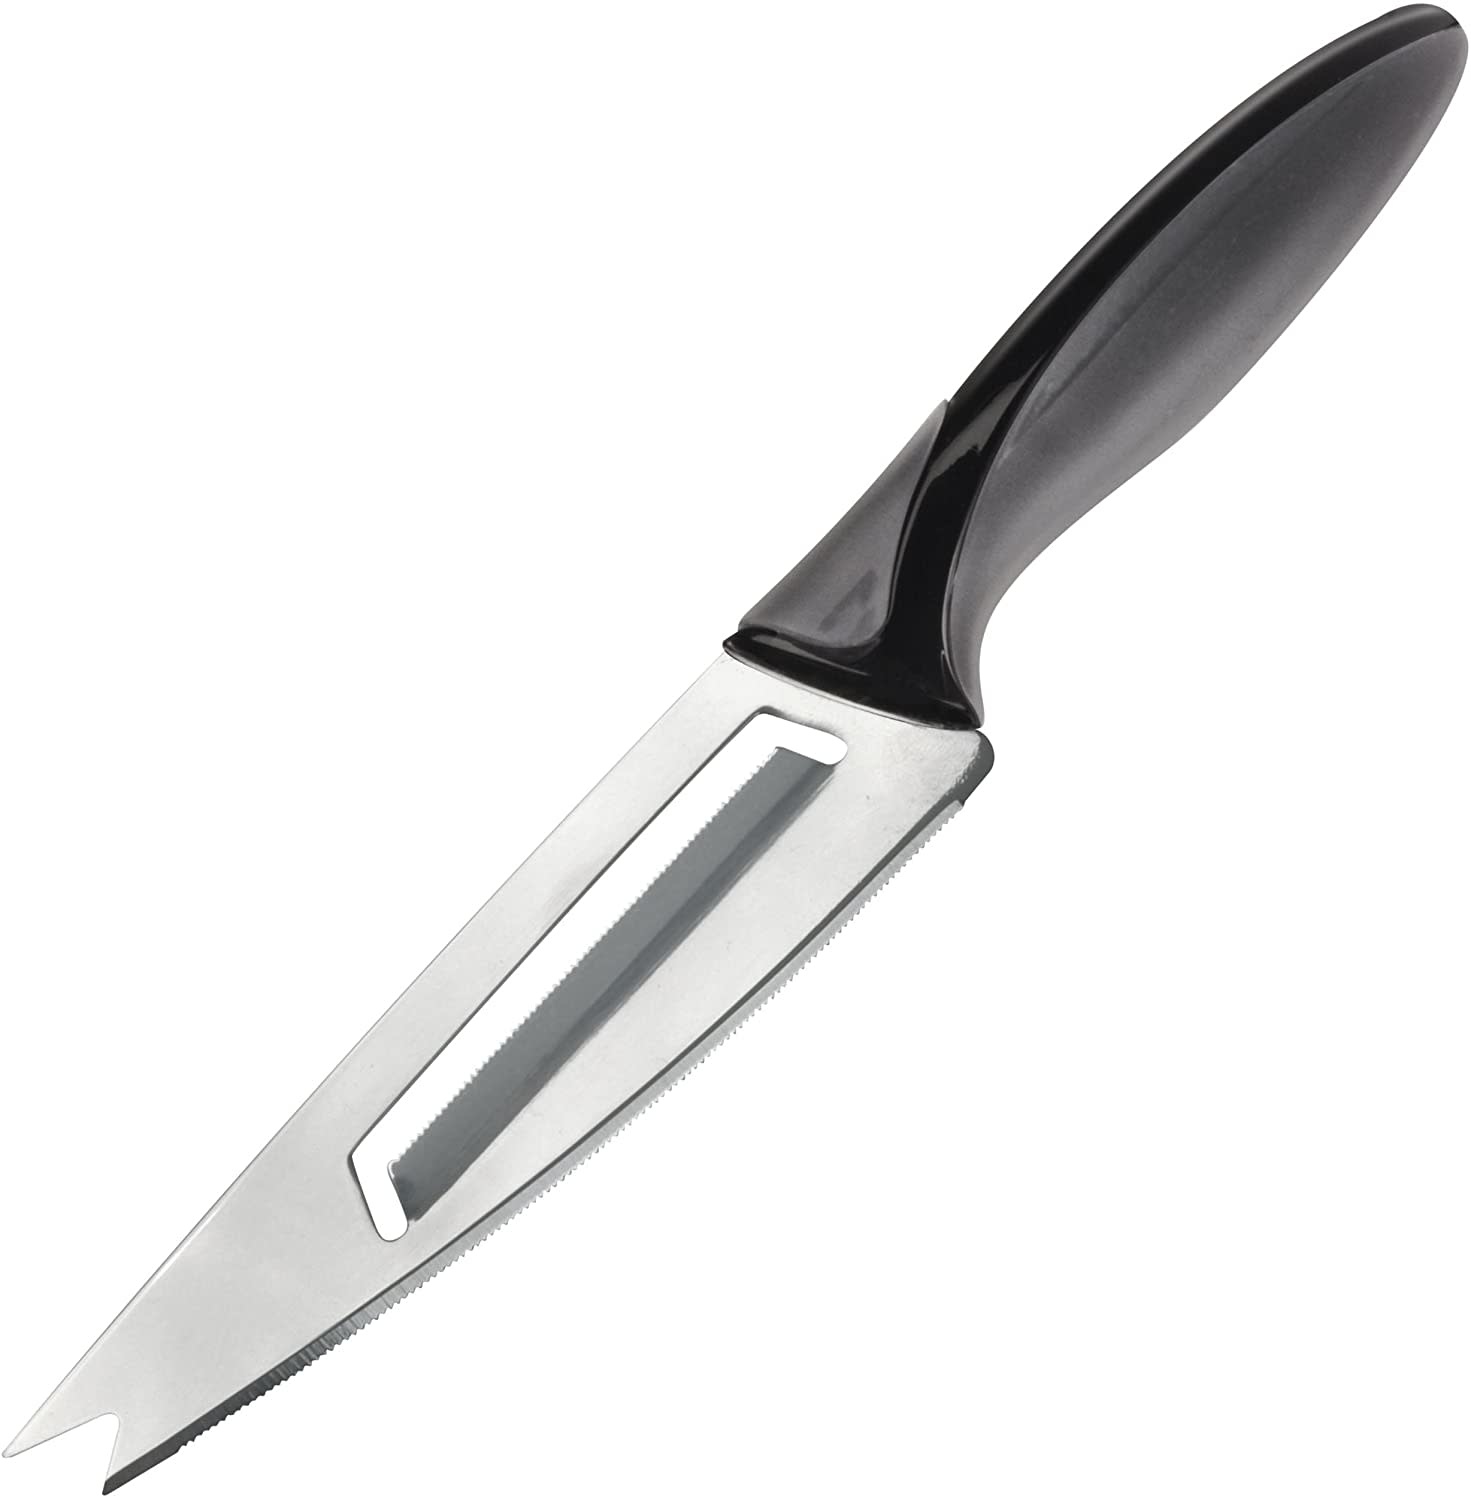 Zyliss Stainless Steel Cheese Knife